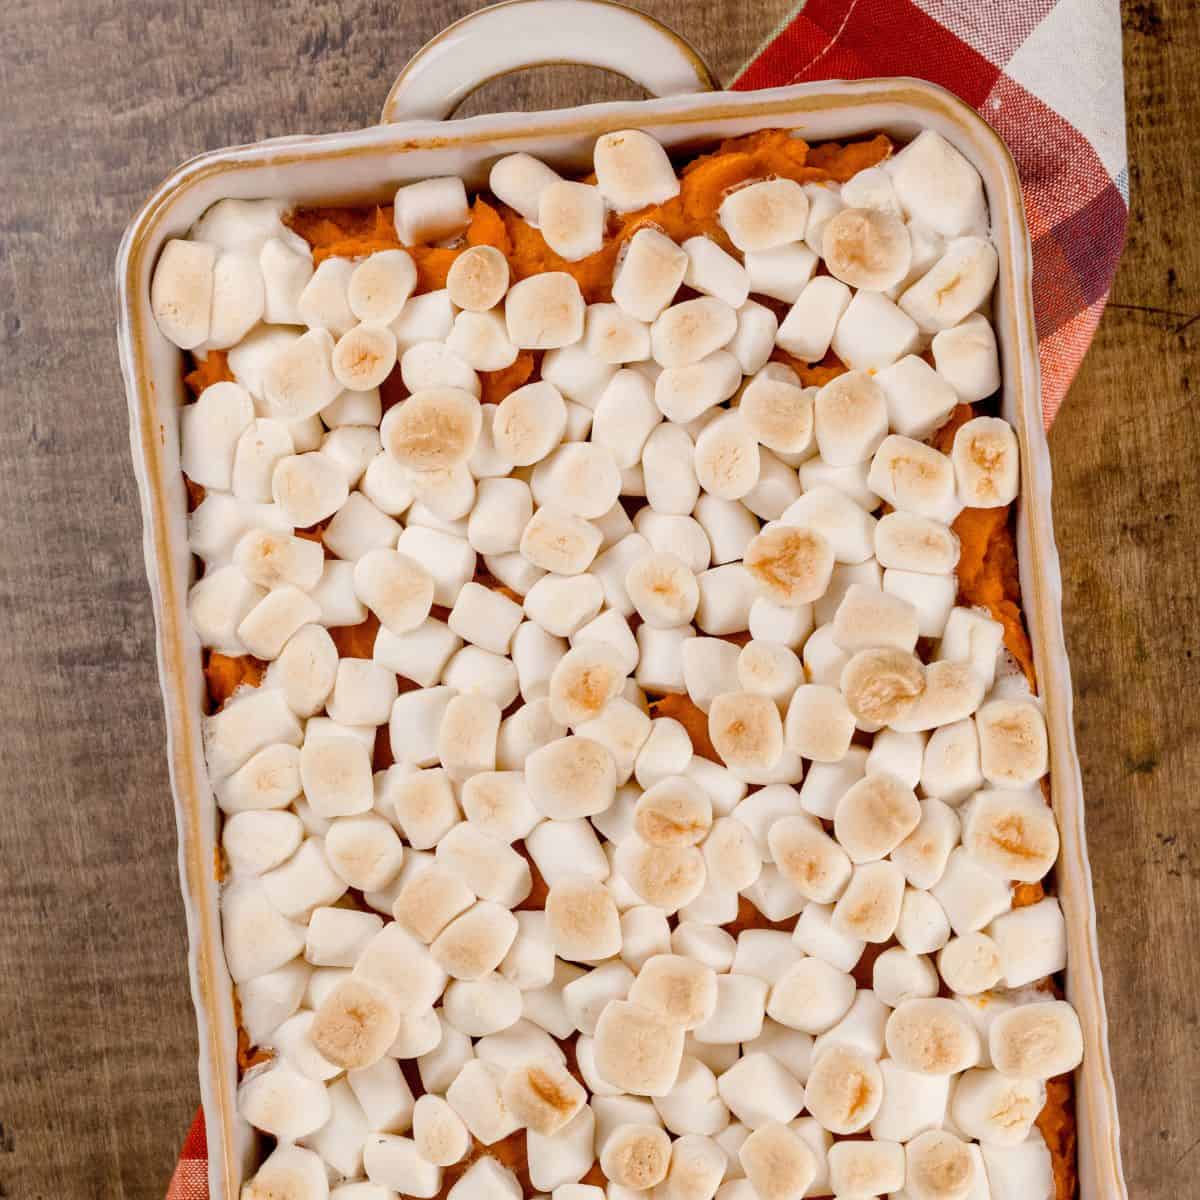 baking dish filled with roasted sweet potatoes with marshmallows resting on an autumnal kitchen towel on the wood table.